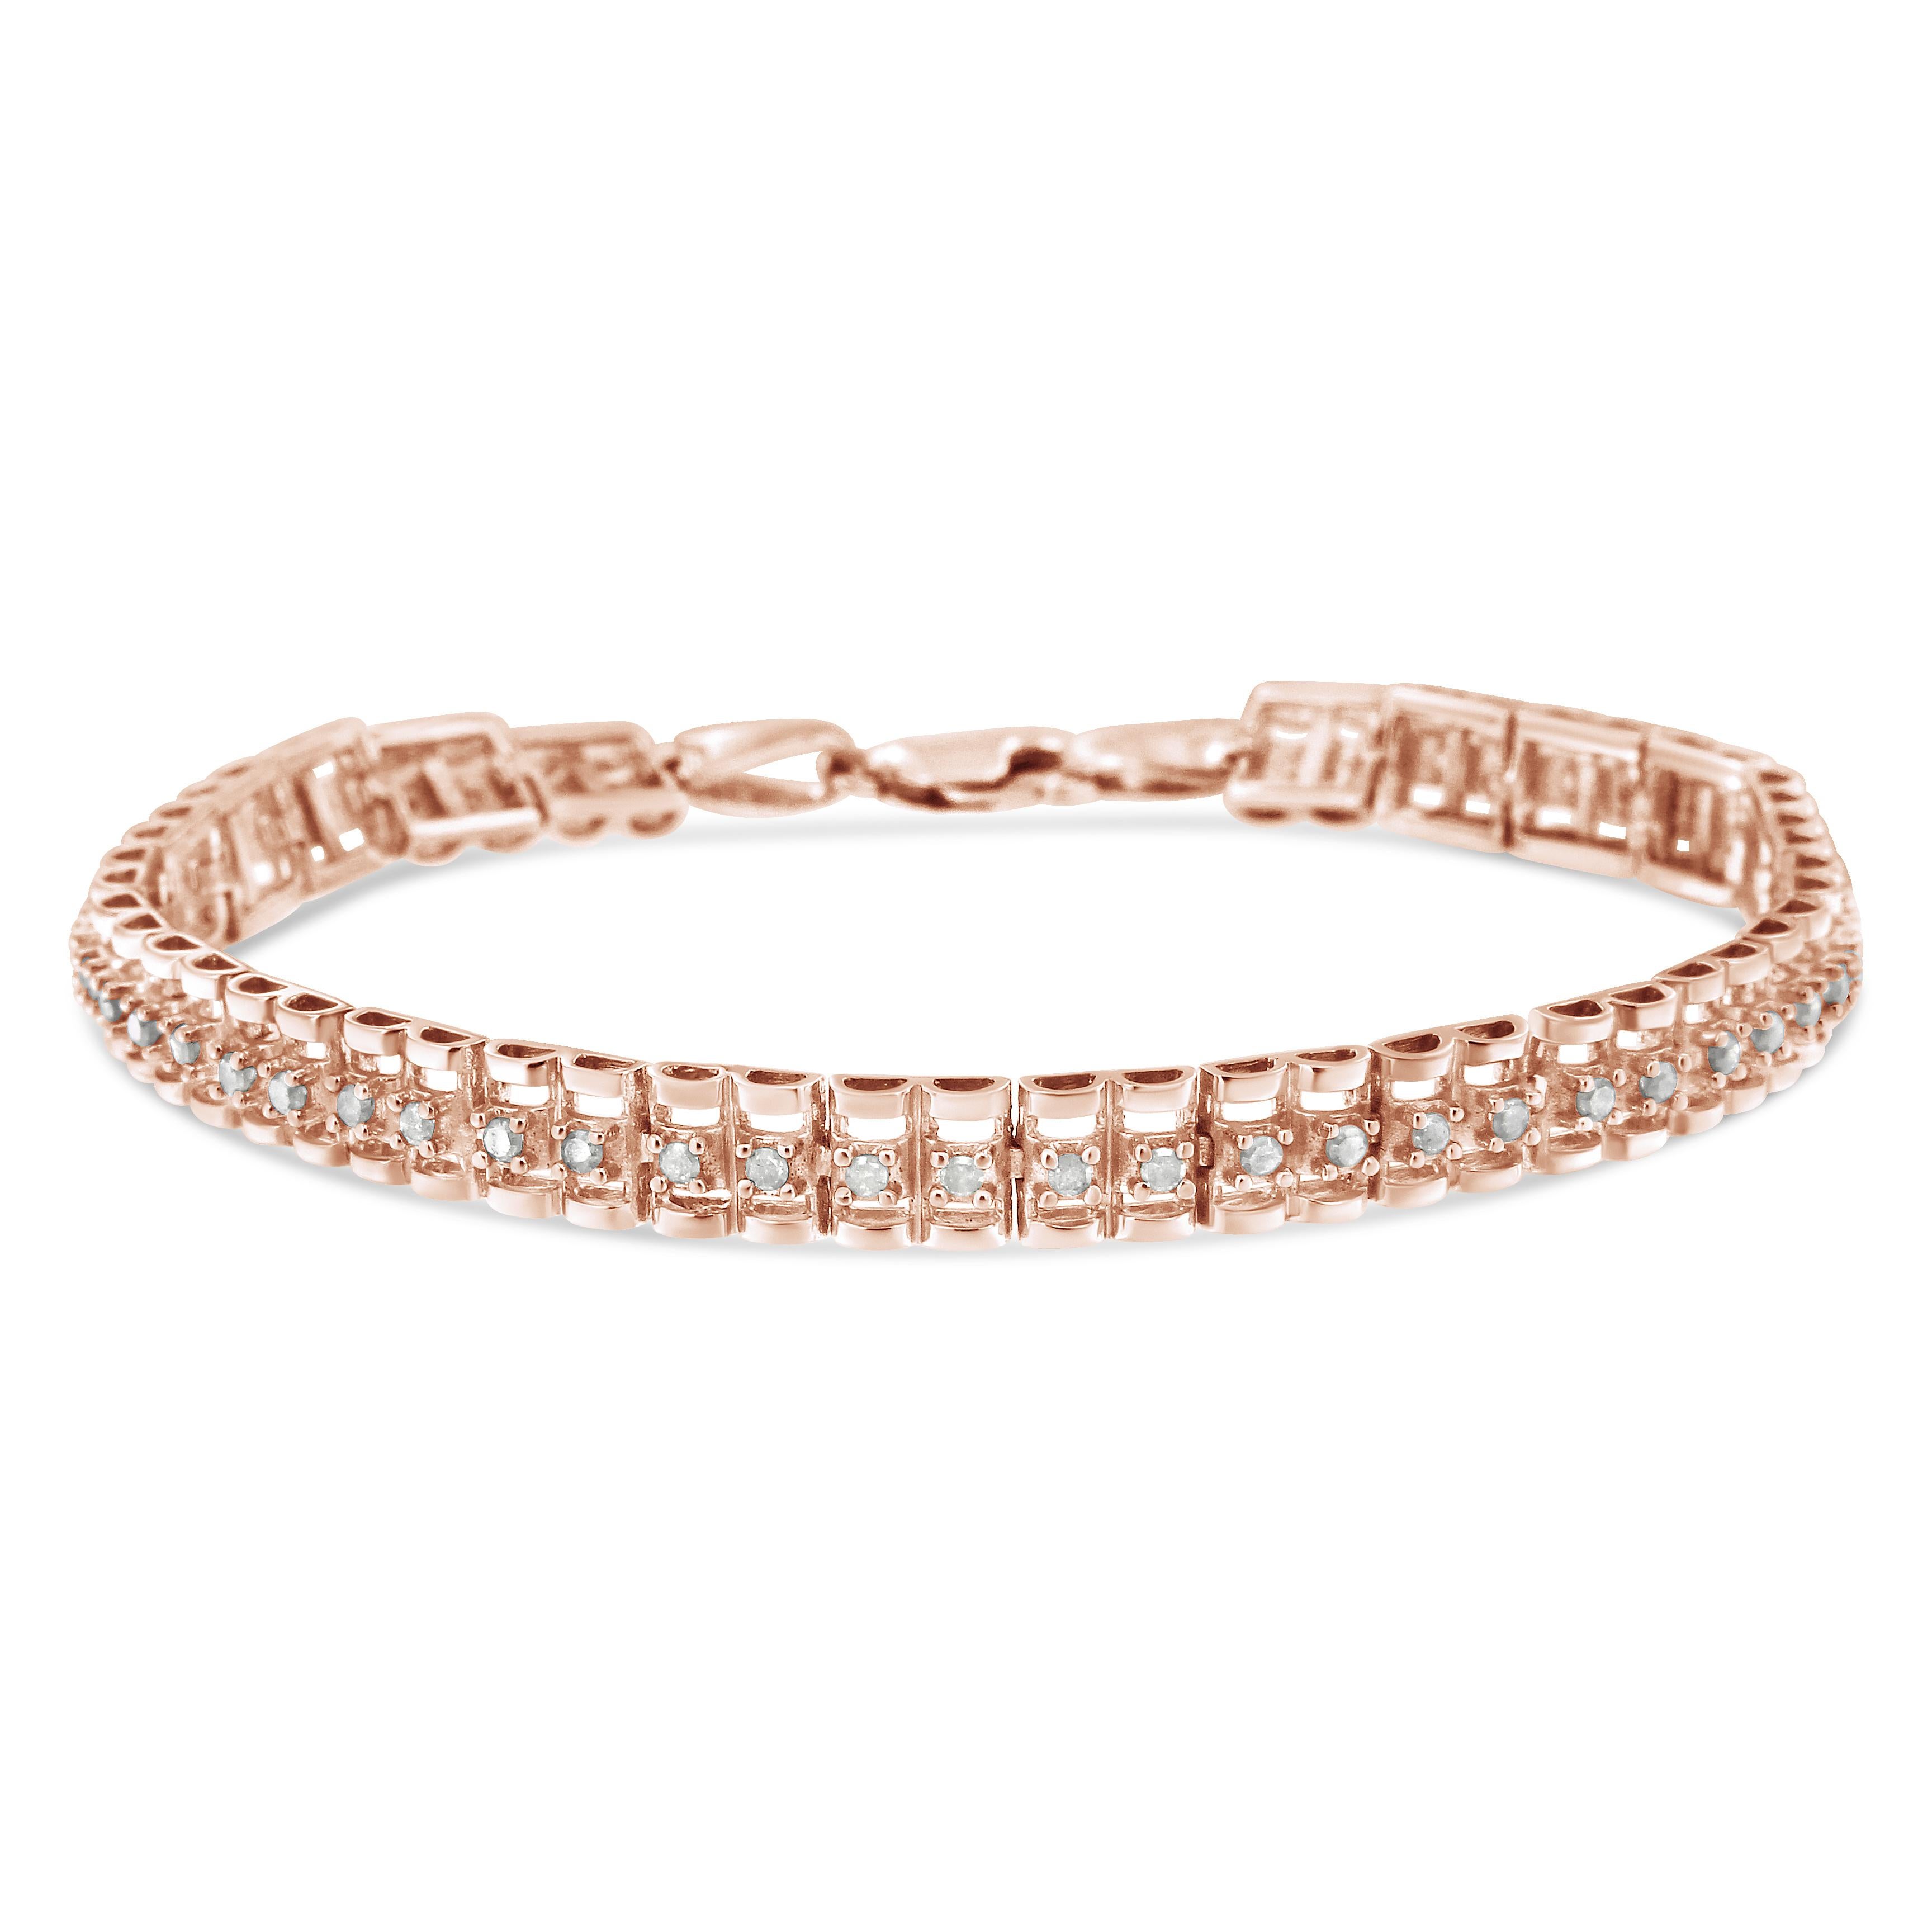 10K Rose Gold Over Silver 2.0 Carat Diamond Double-Link Tennis Bracelet In New Condition For Sale In New York, NY